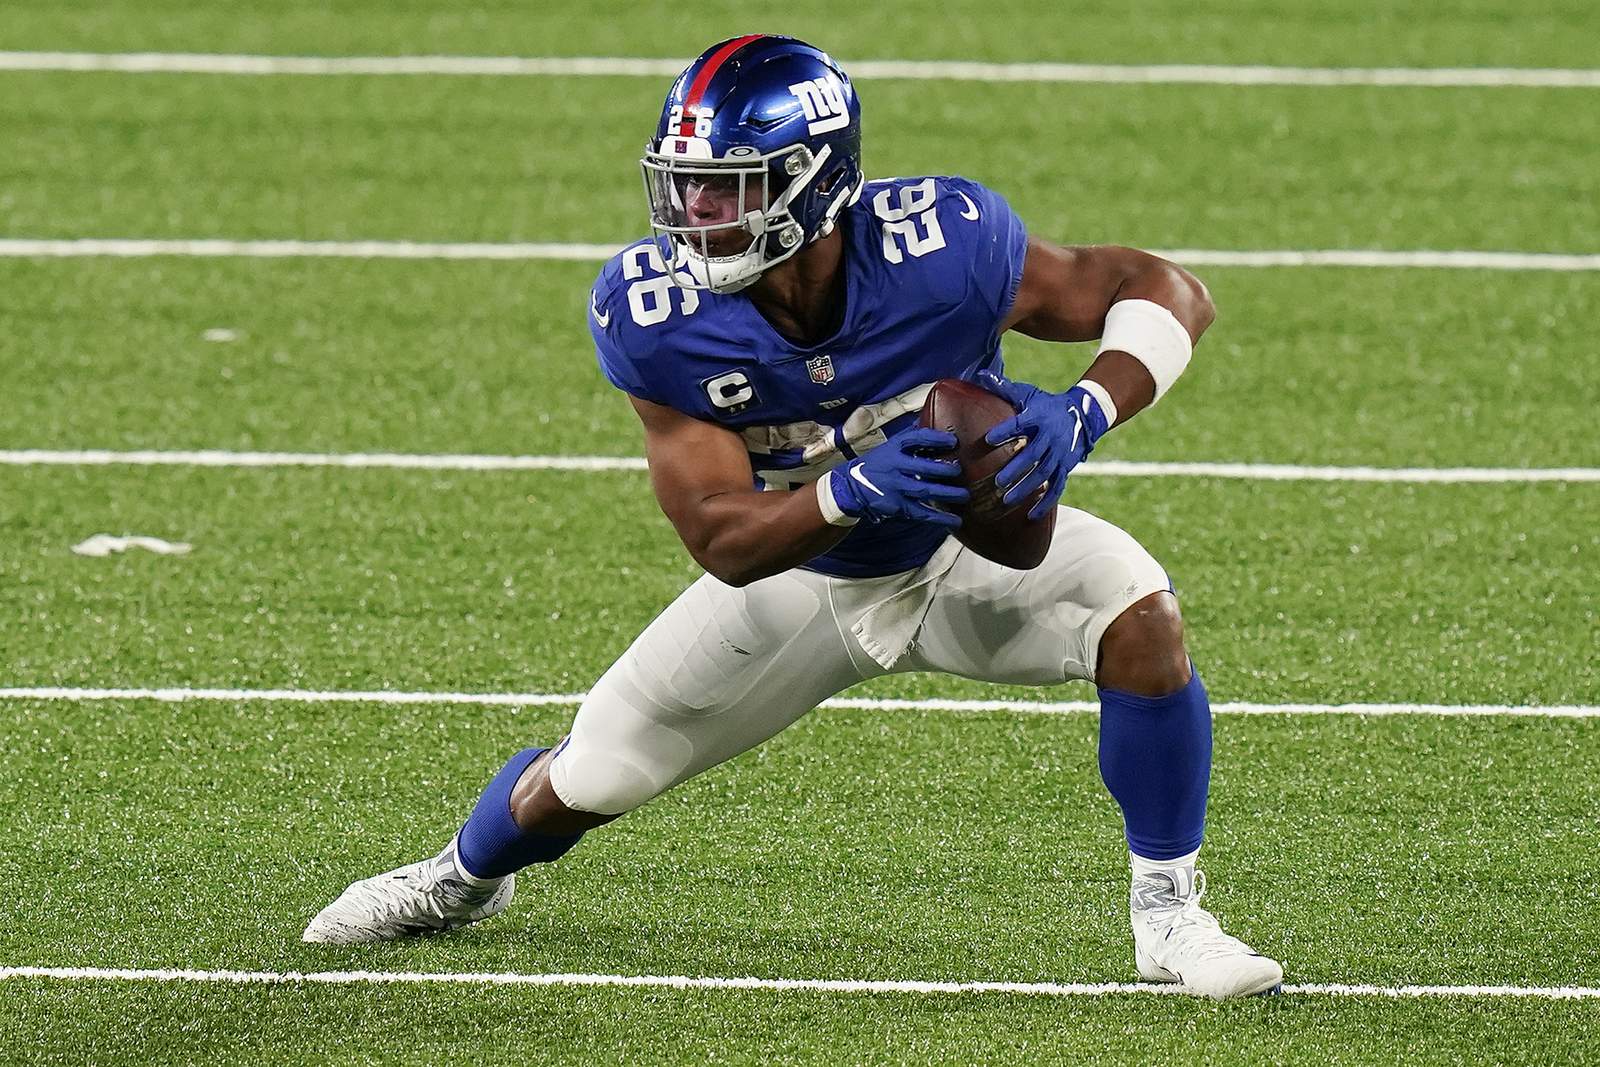 Giants' Barkley has ACL surgery on right knee in California